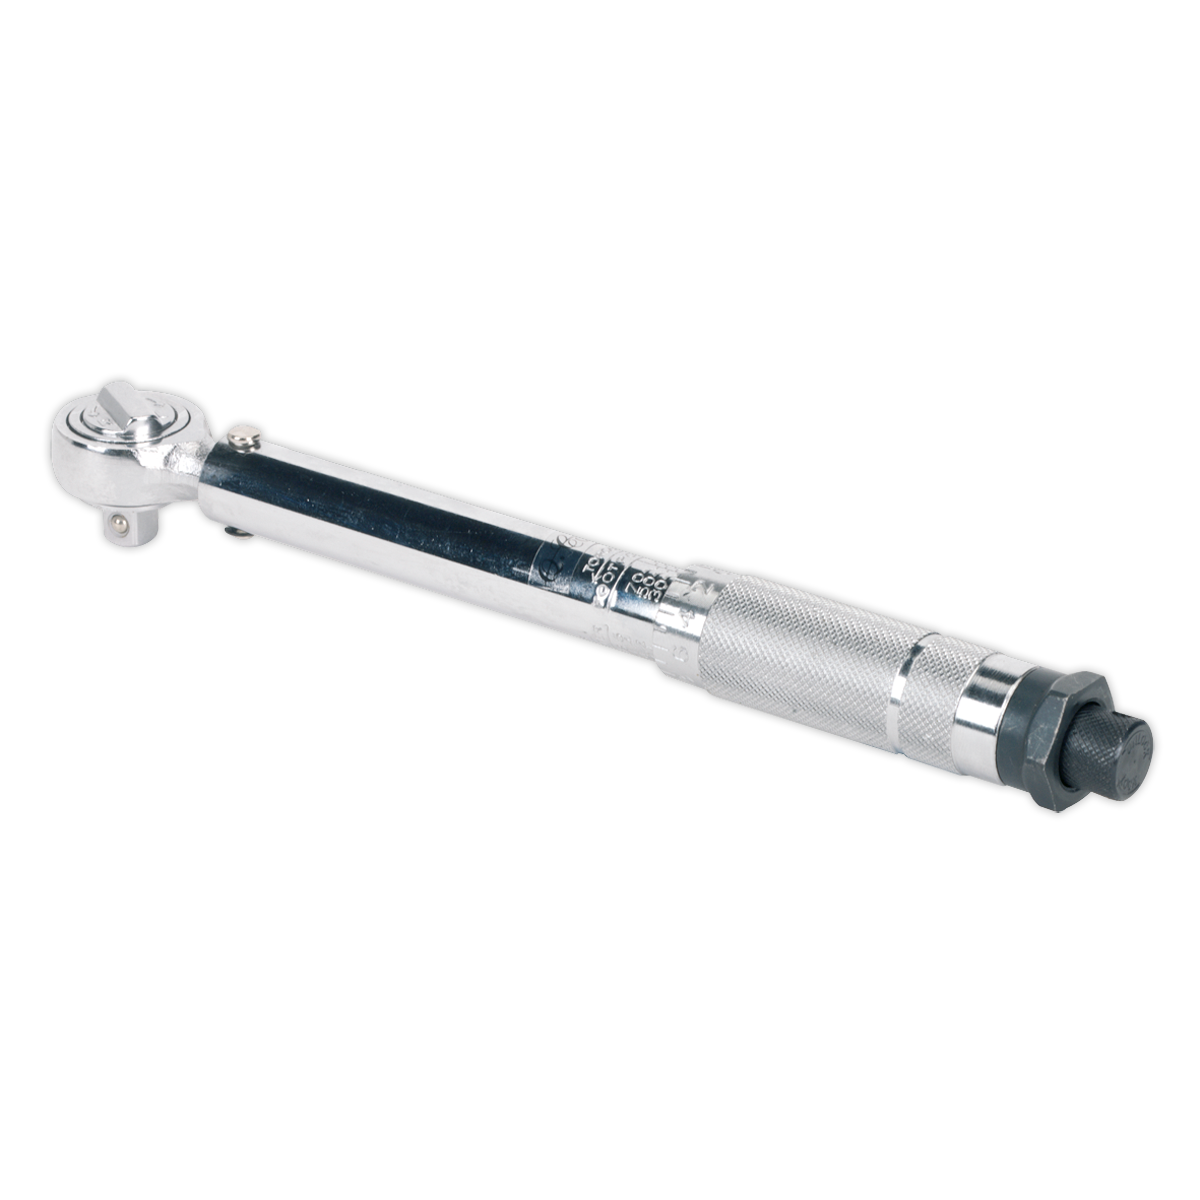 Sealey Micrometer Torque Wrench 3/8"Sq Drive